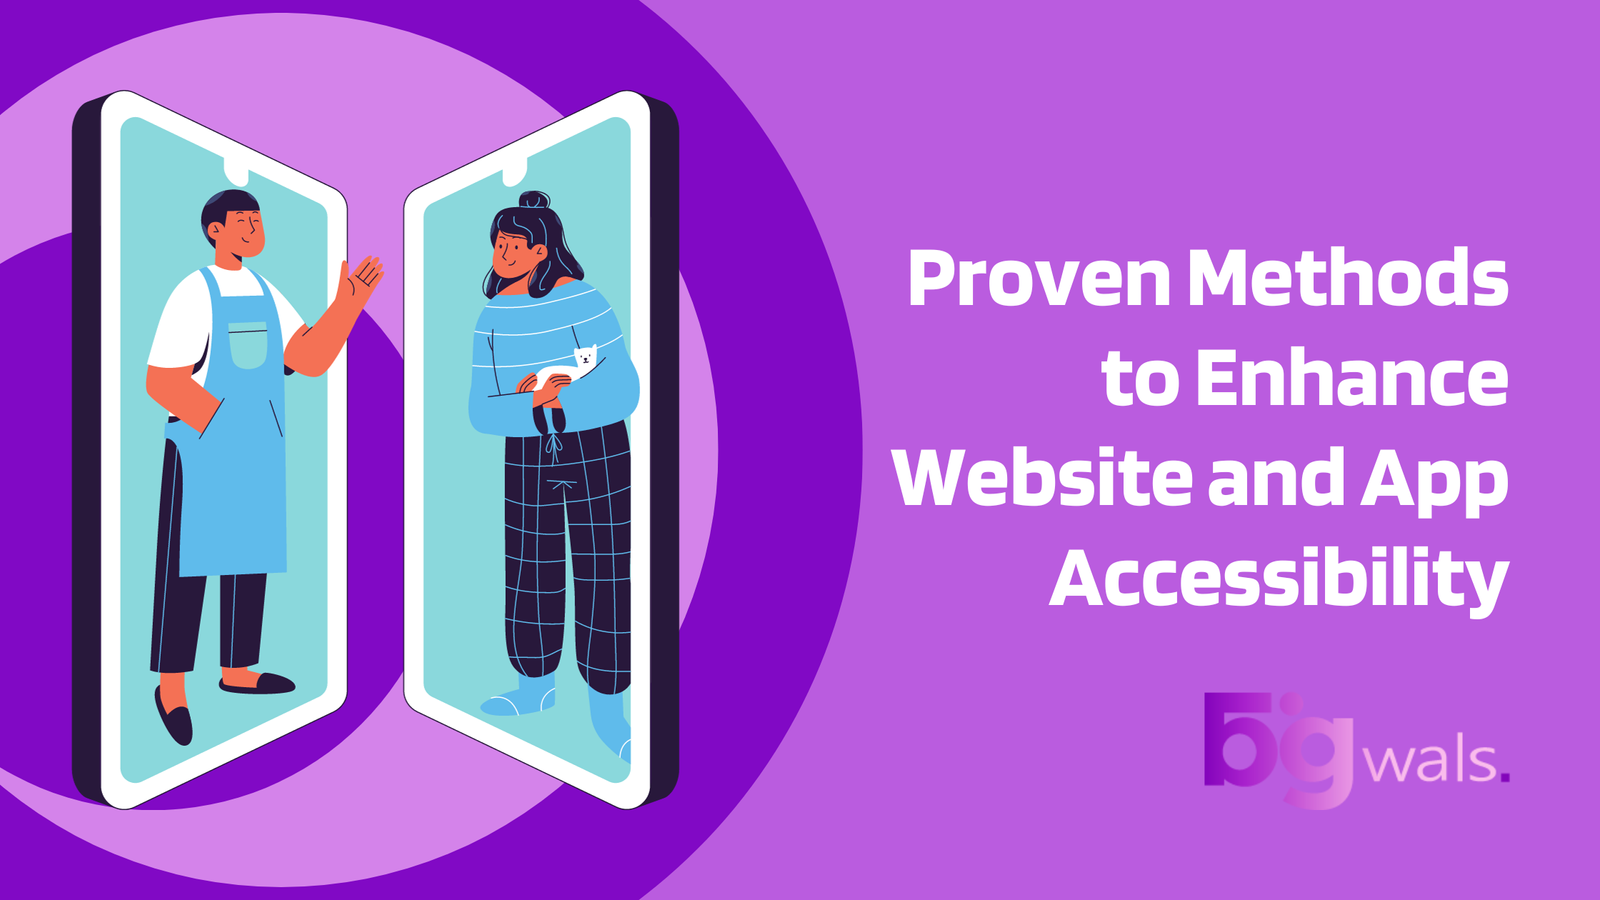 Proven Methods to Enhance Website and App Accessibility